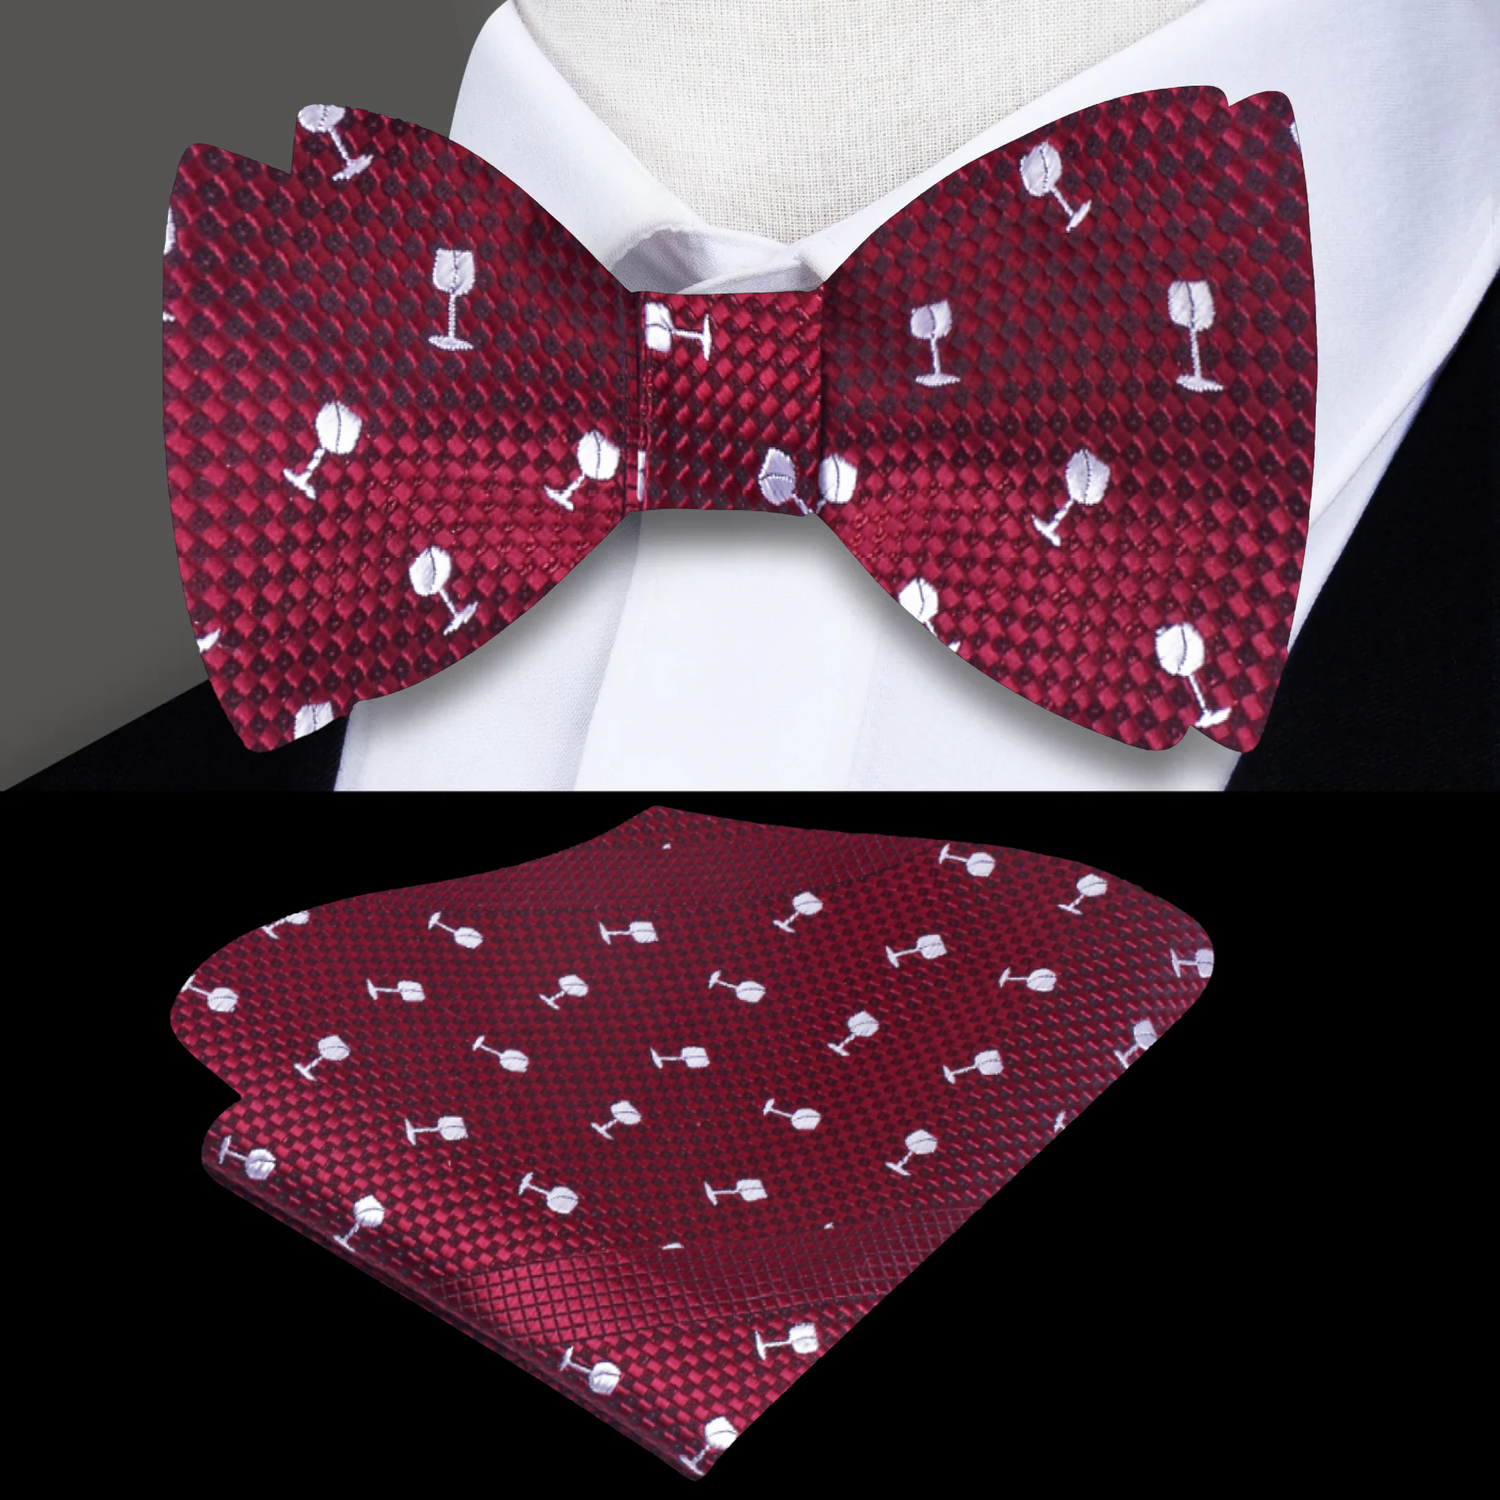 Burgundy, White Wine Glass Bow Tie and Pocket Square